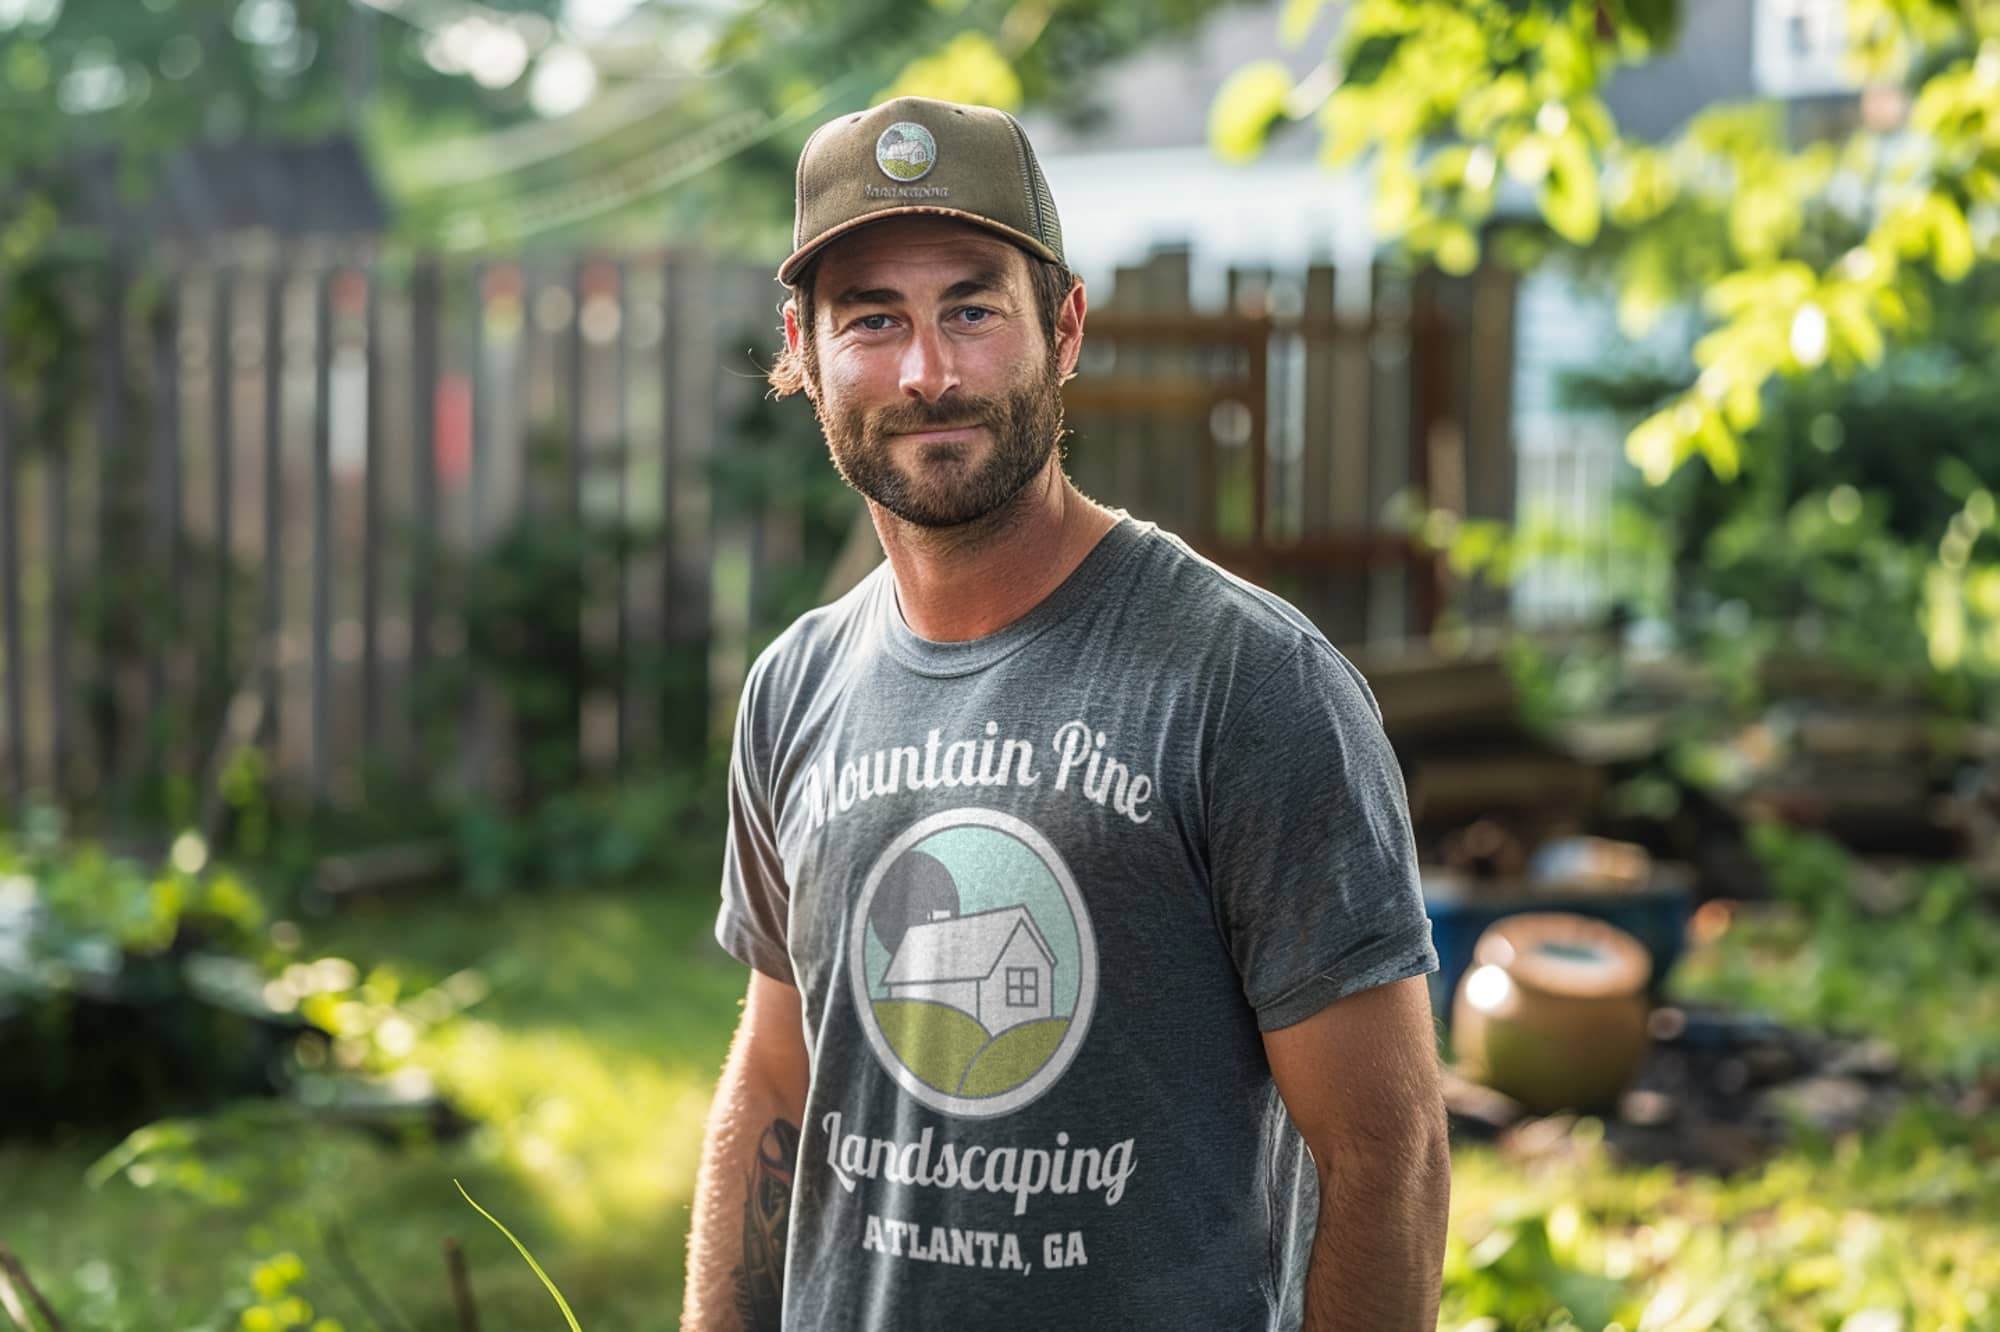 A male landscaper wearing a t-shirt that features his company's logo.